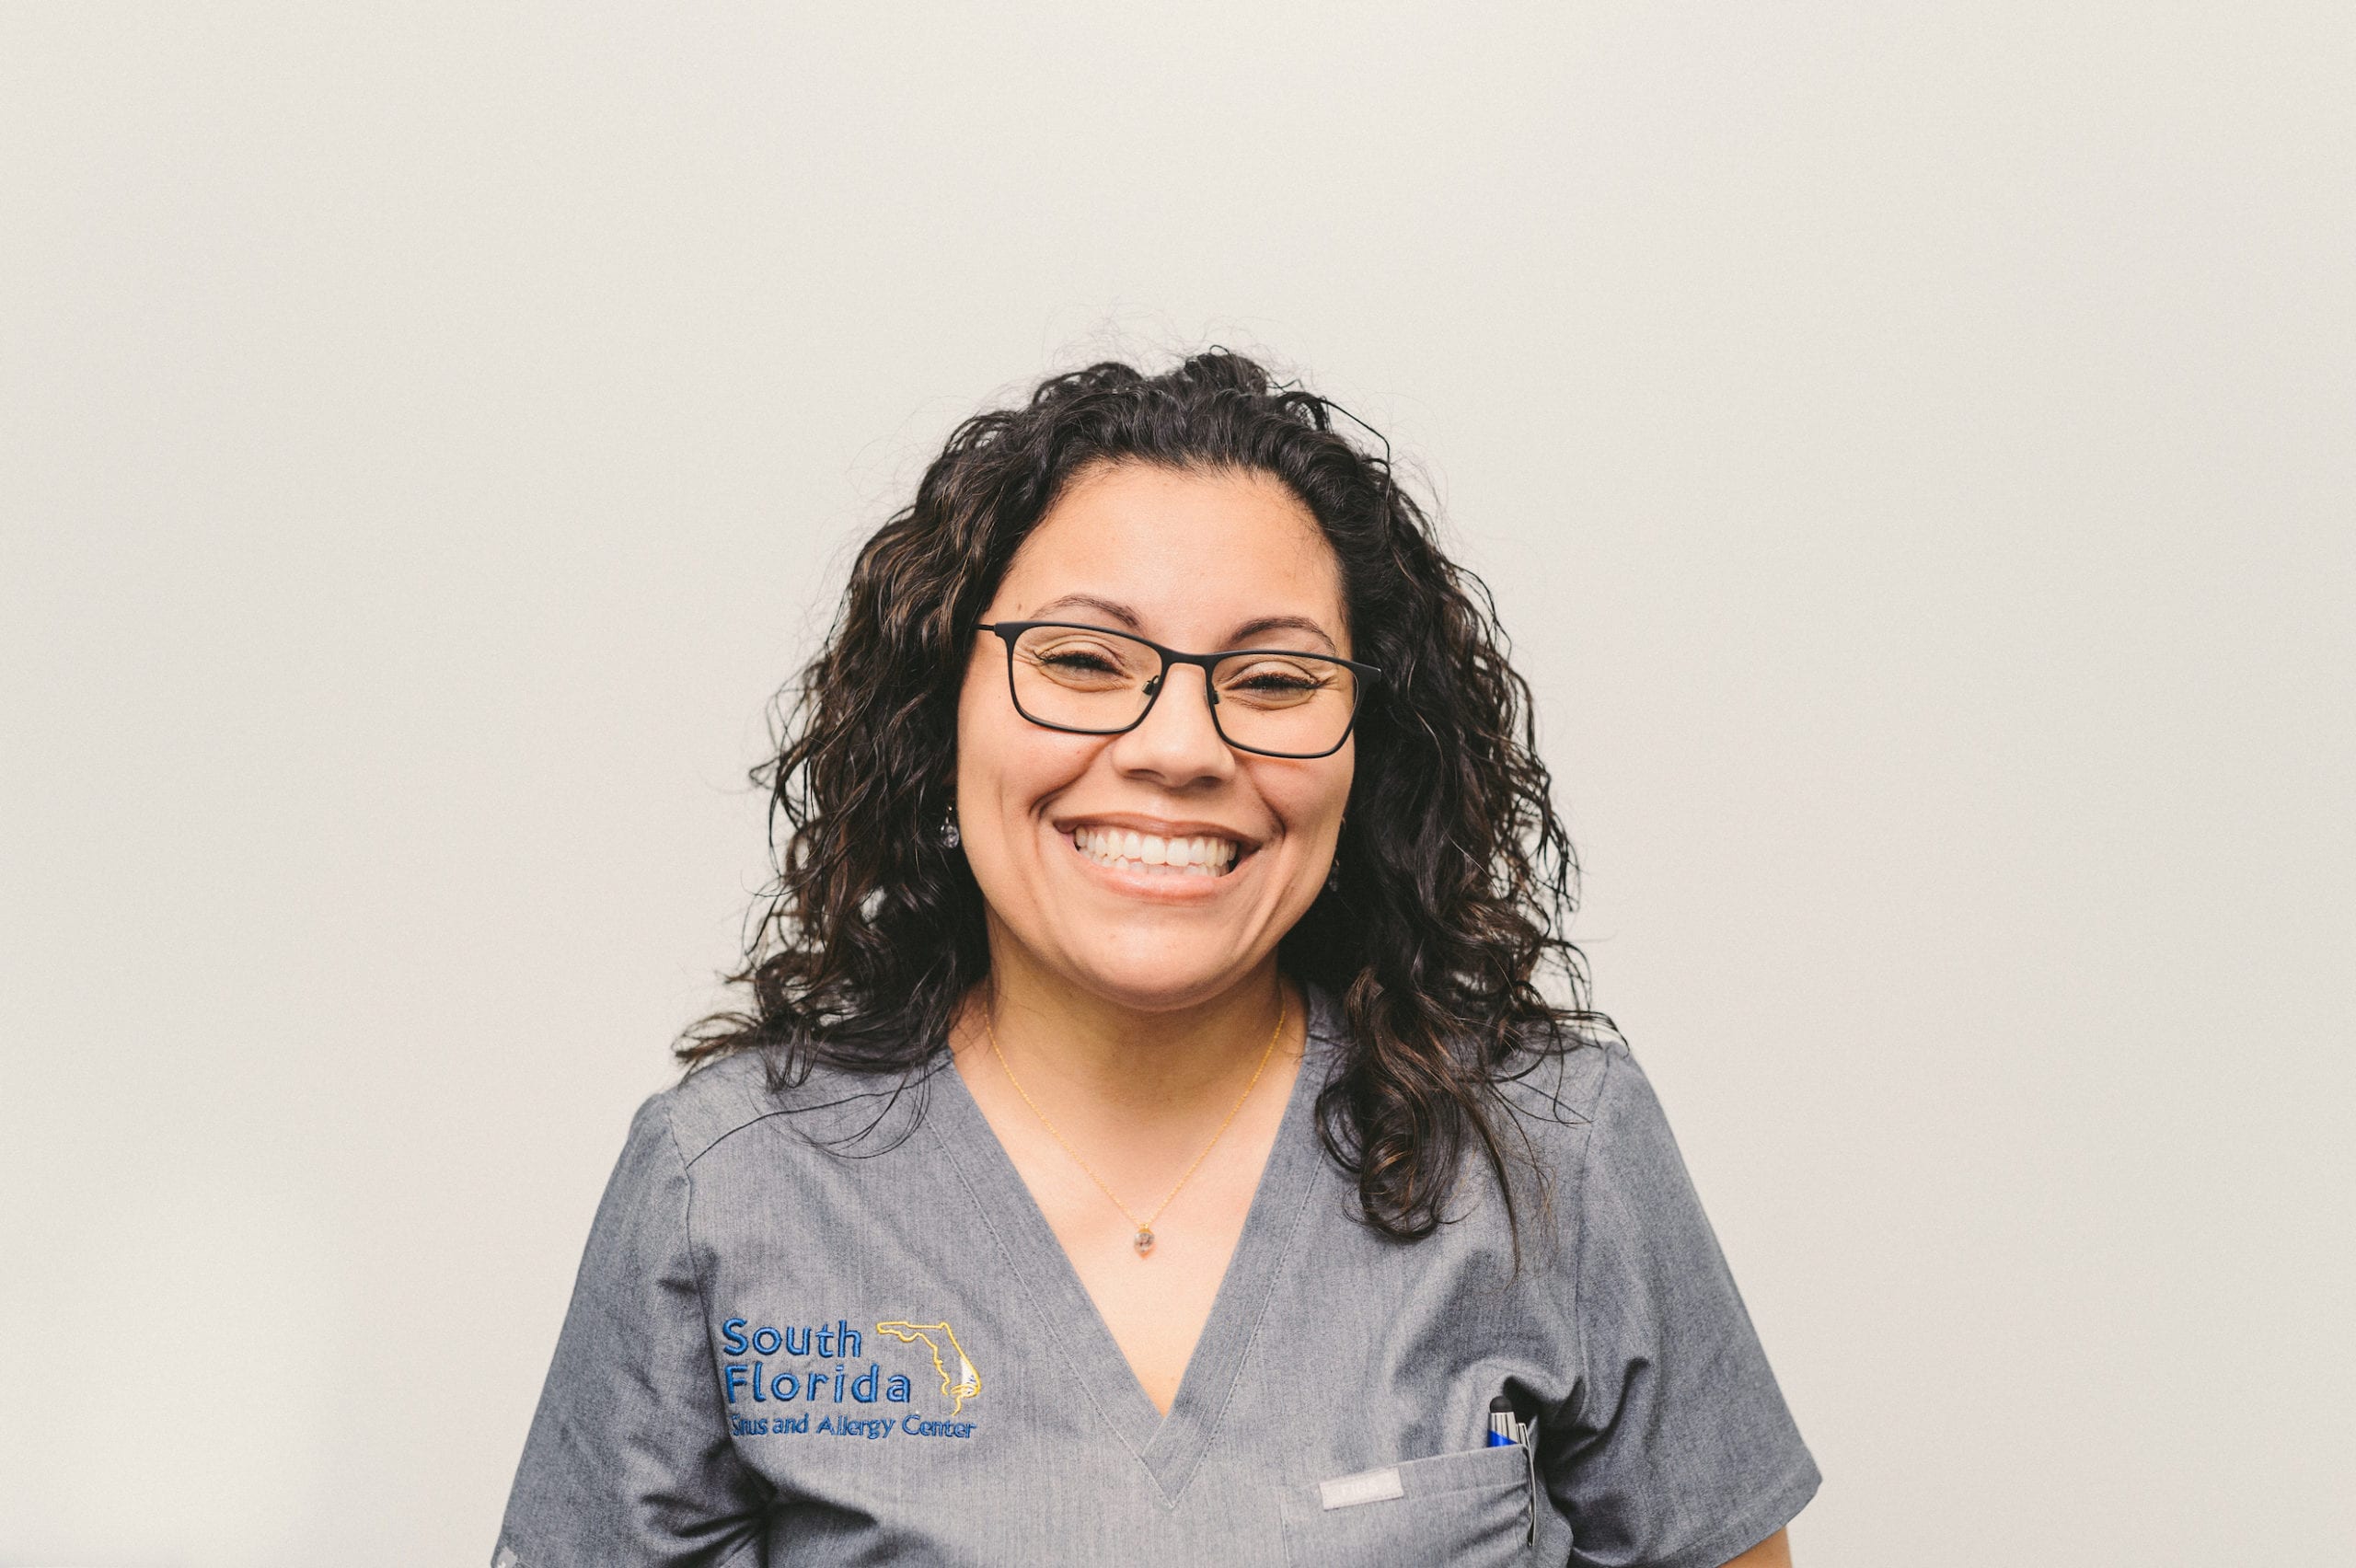 South Florida Sinus and Allergy Center Headshot of a female doctor posing and smiling for the camera